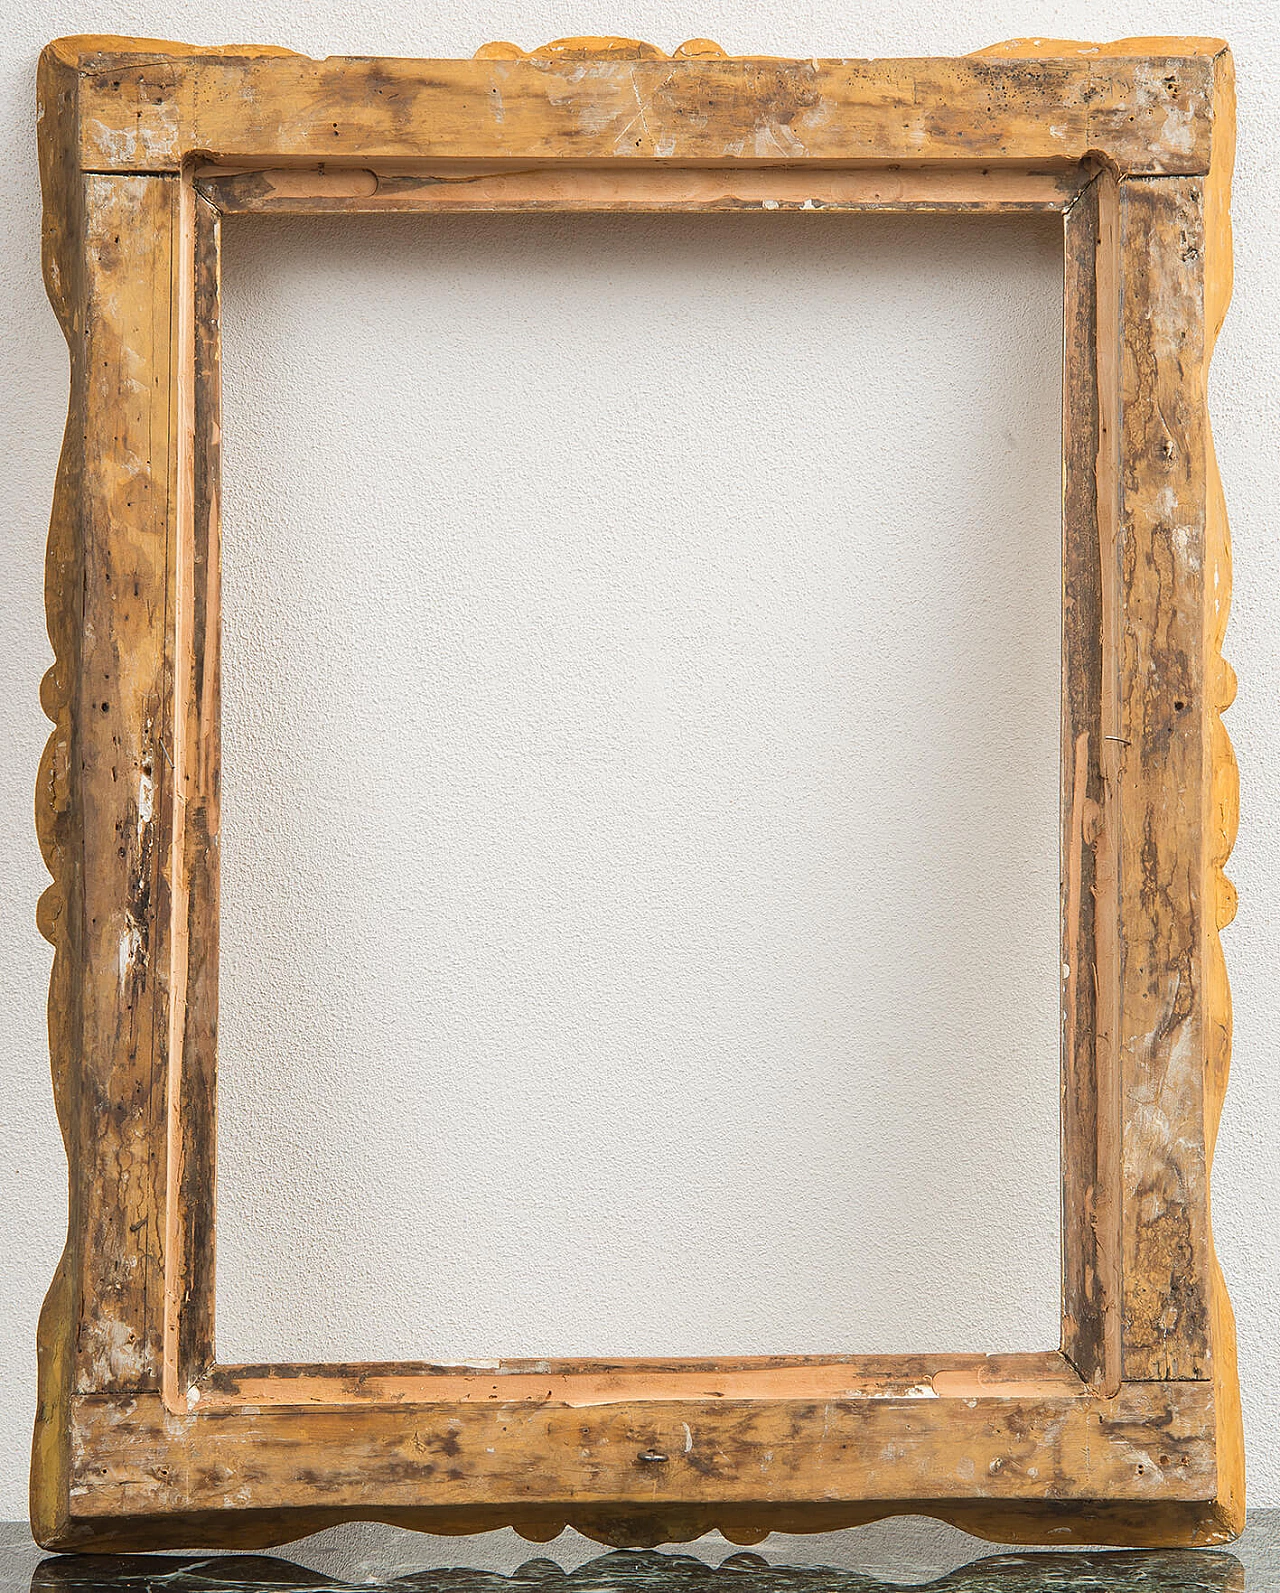 Neapolitan Empire gilded wood frame, early 19th century 3